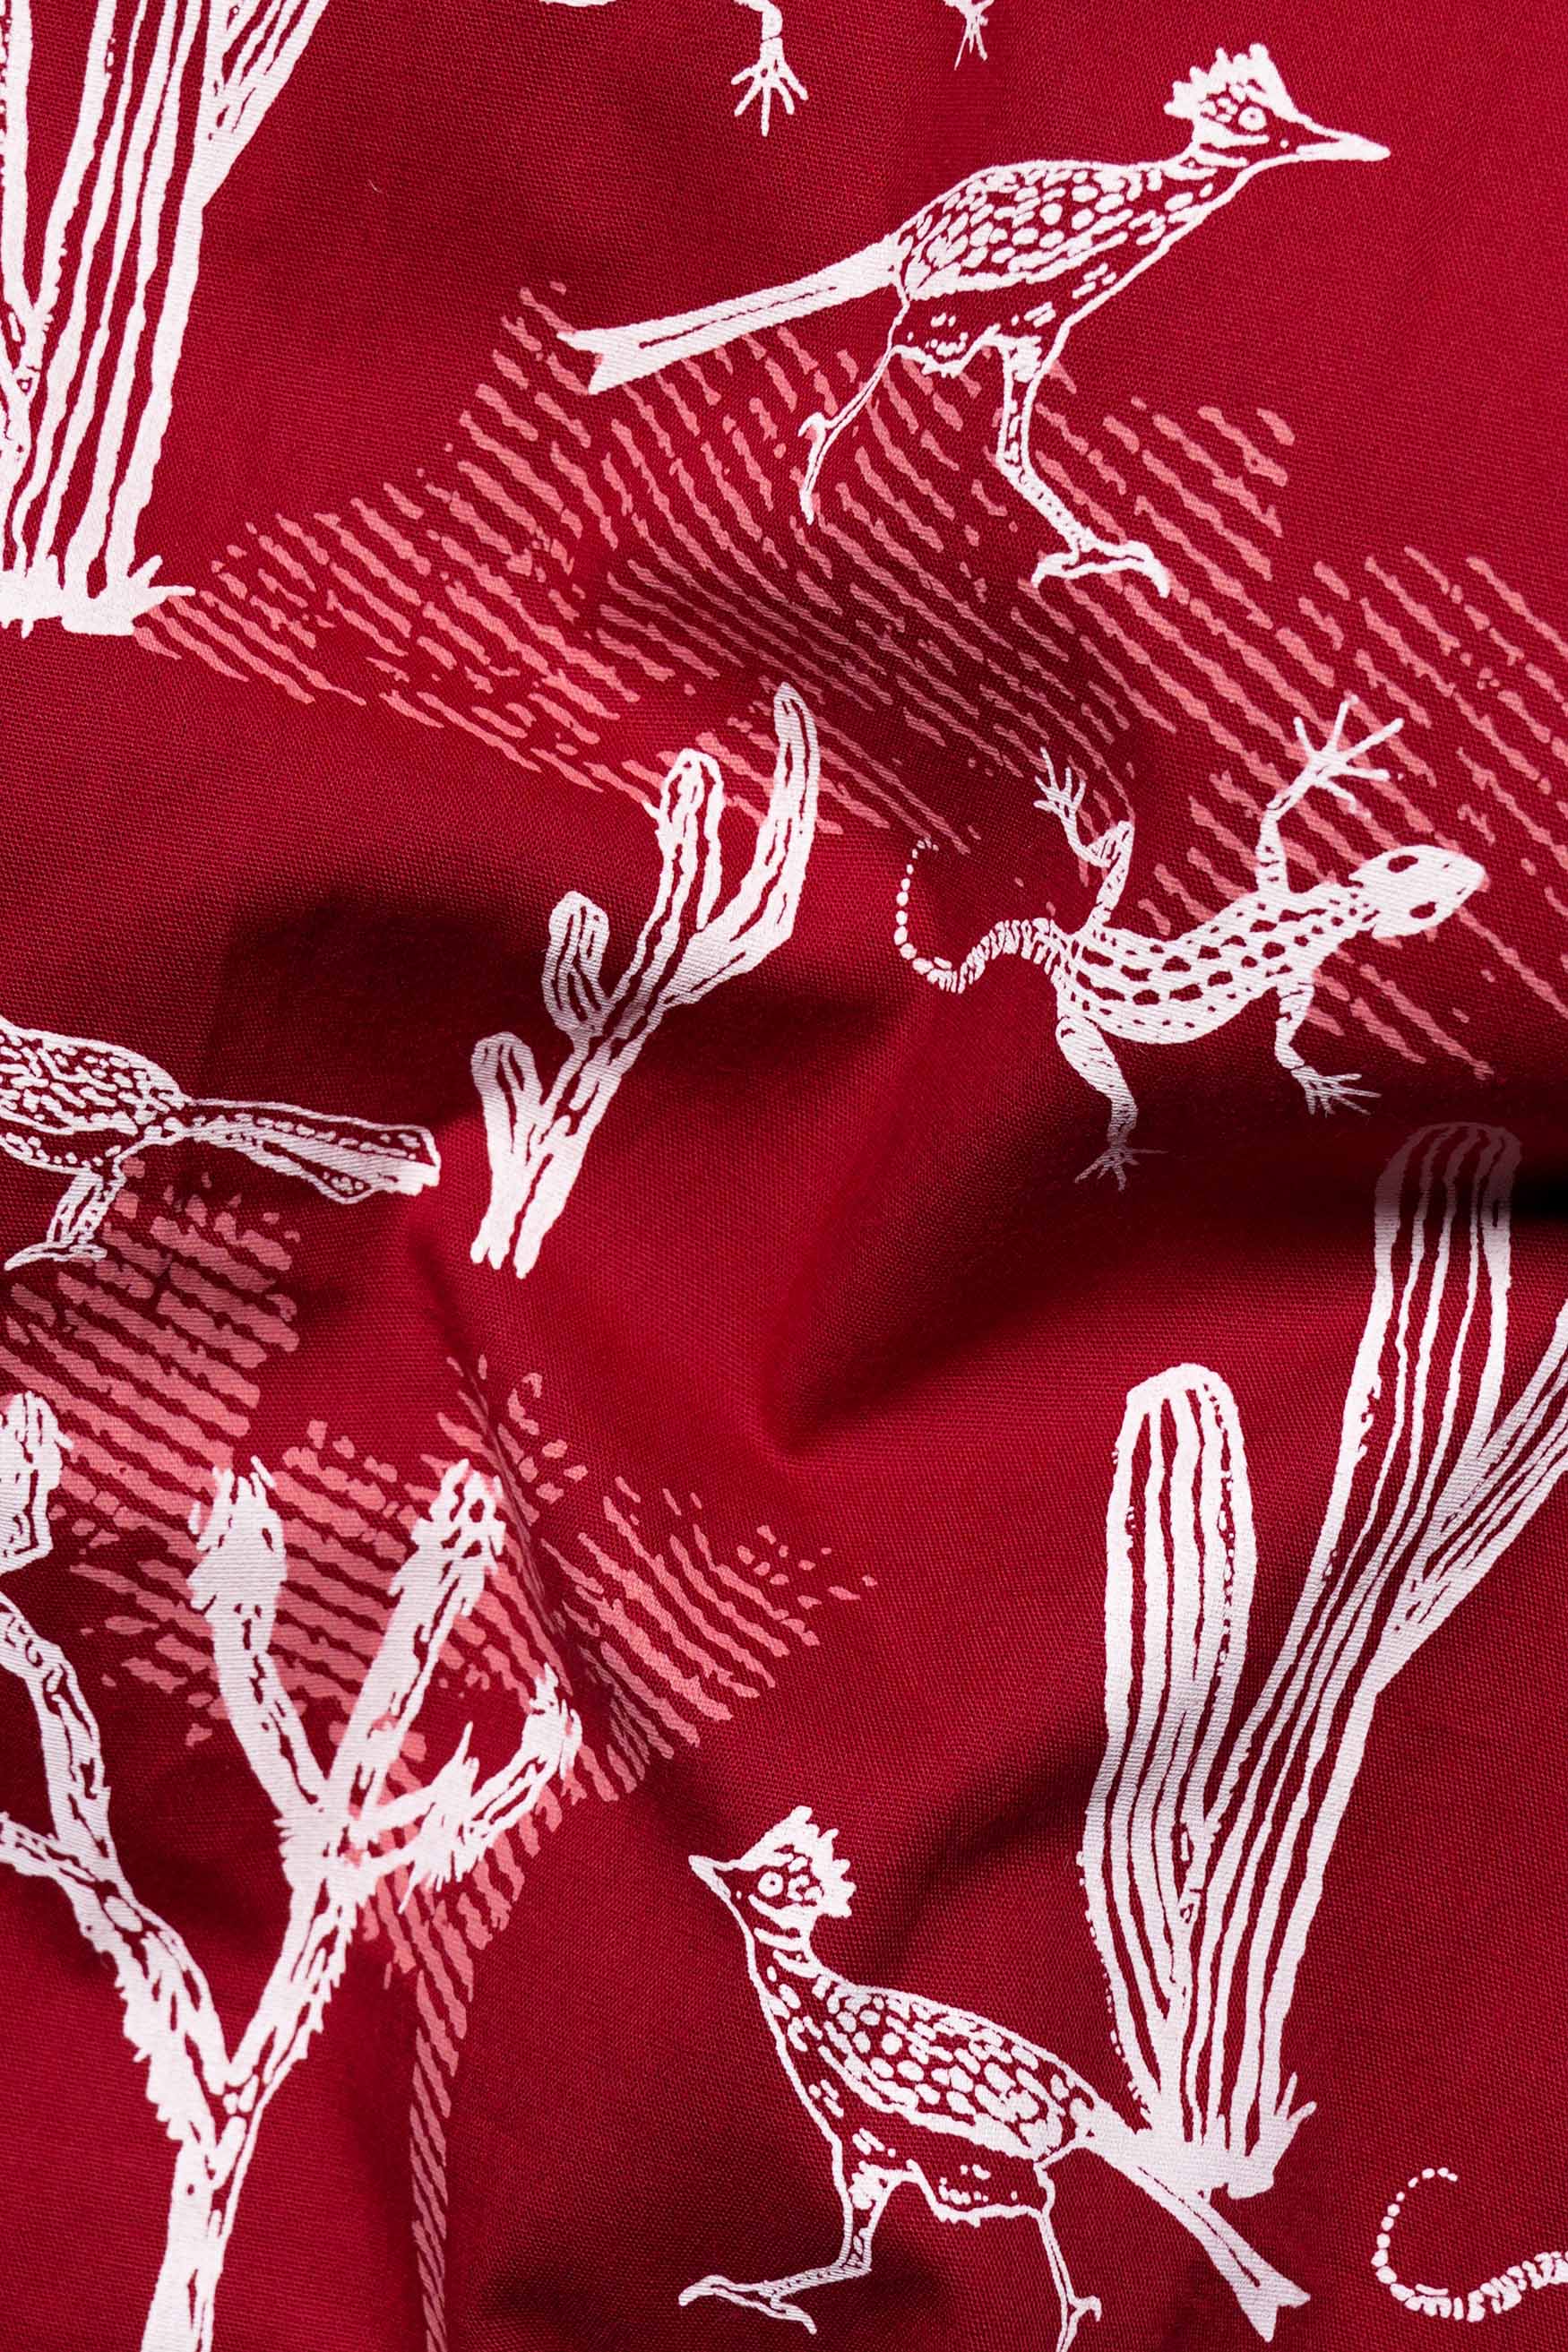 Monarch Red and Bright White Animal Printed Premium Cotton Shirt 11442-RD-38, 11442-RD-H-38, 11442-RD-39, 11442-RD-H-39, 11442-RD-40, 11442-RD-H-40, 11442-RD-42, 11442-RD-H-42, 11442-RD-44, 11442-RD-H-44, 11442-RD-46, 11442-RD-H-46, 11442-RD-48, 11442-RD-H-48, 11442-RD-50, 11442-RD-H-50, 11442-RD-52, 11442-RD-H-52